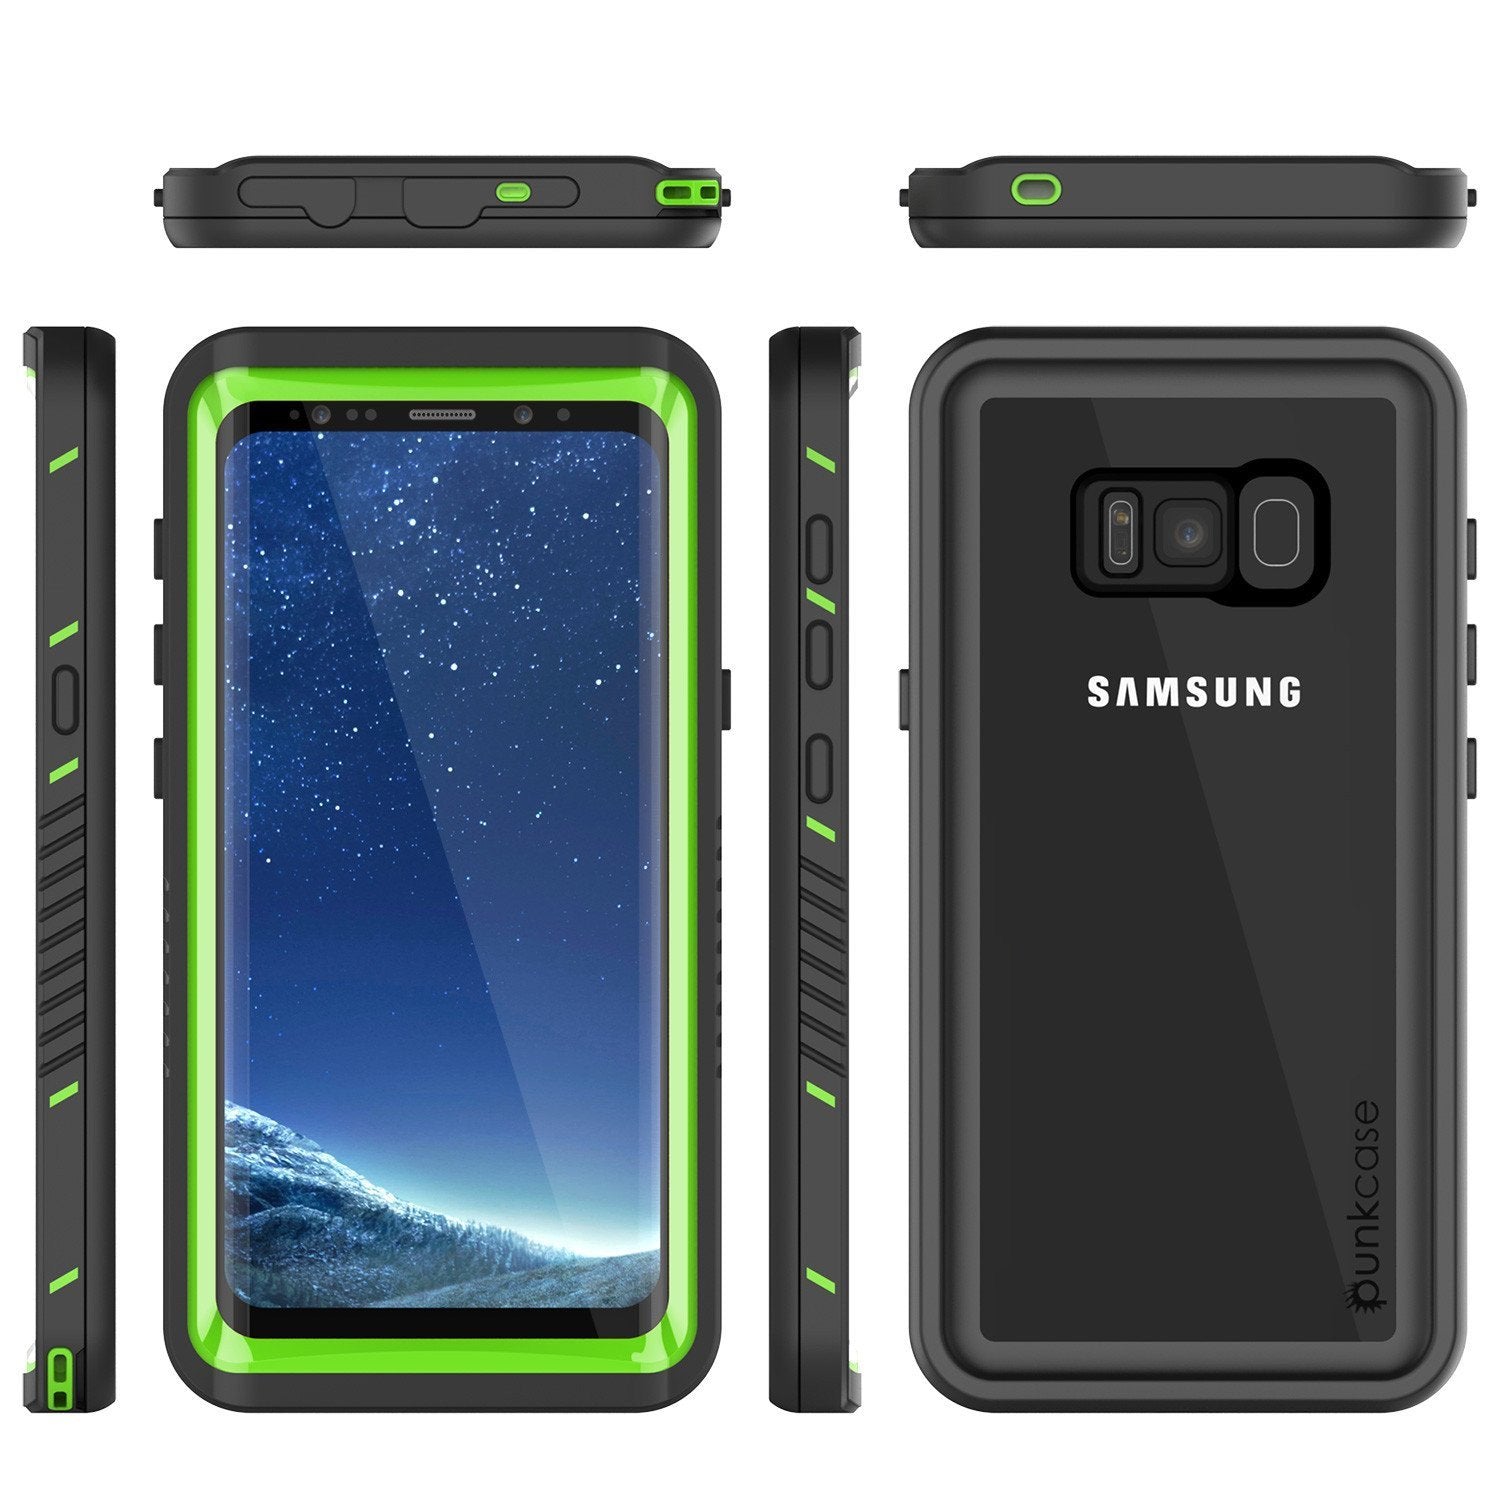 Galaxy S8 PLUS Waterproof Case, Punkcase [Extreme Series] [Slim Fit] [IP68 Certified] [Shockproof] [Snowproof] [Dirproof] Armor Cover W/ Built In Screen Protector for Samsung Galaxy S8+ [Green] - PunkCase NZ